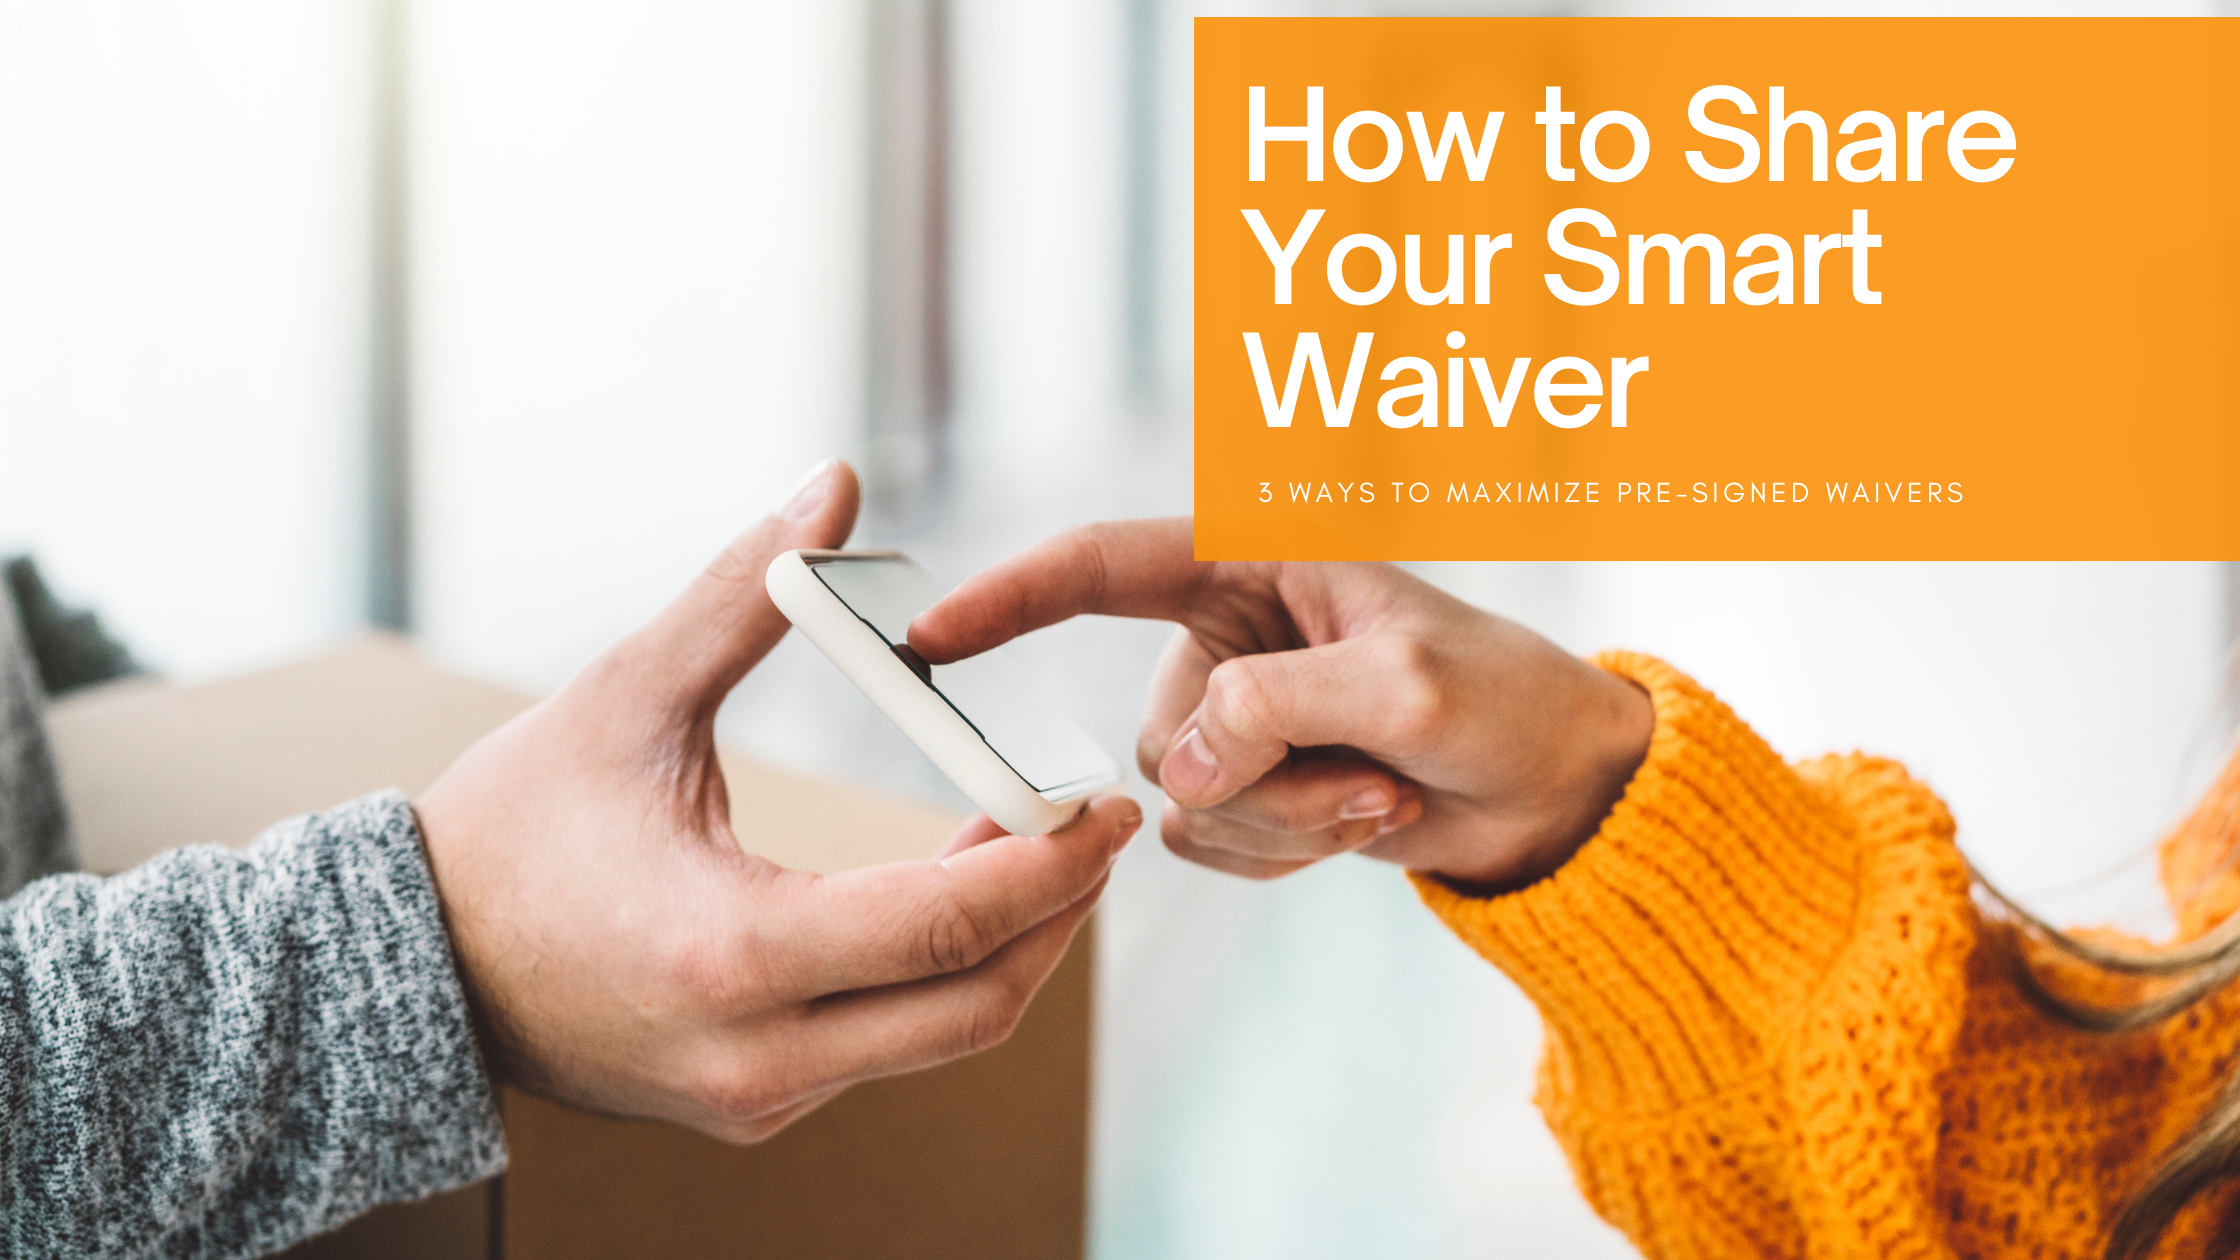 How to Share Your Smart Waiver